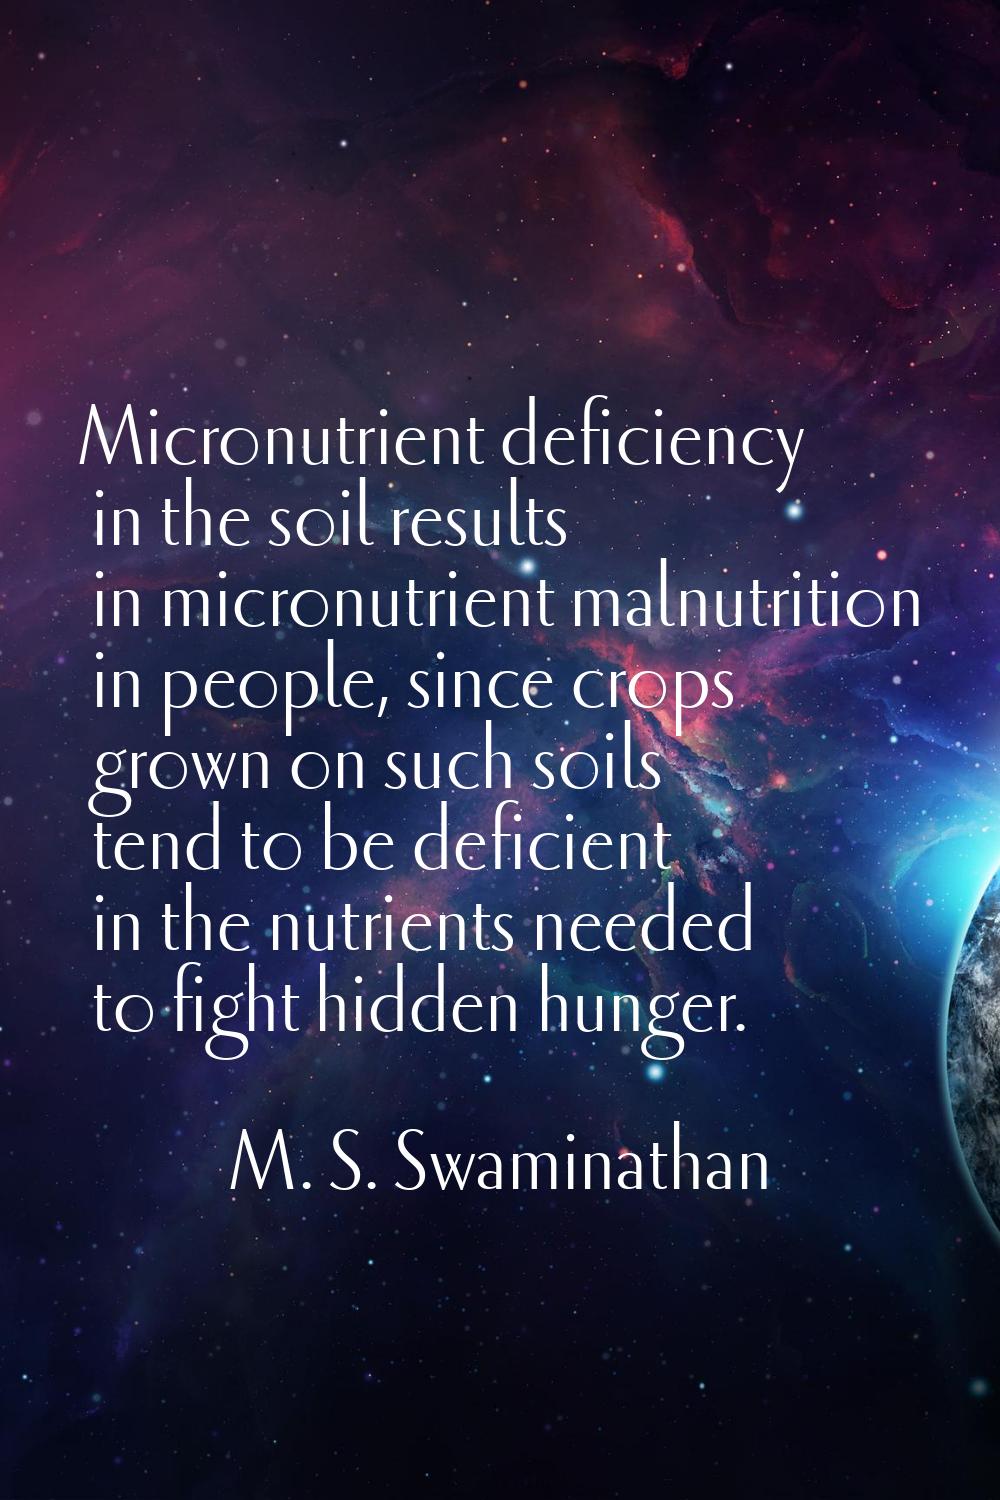 Micronutrient deficiency in the soil results in micronutrient malnutrition in people, since crops g